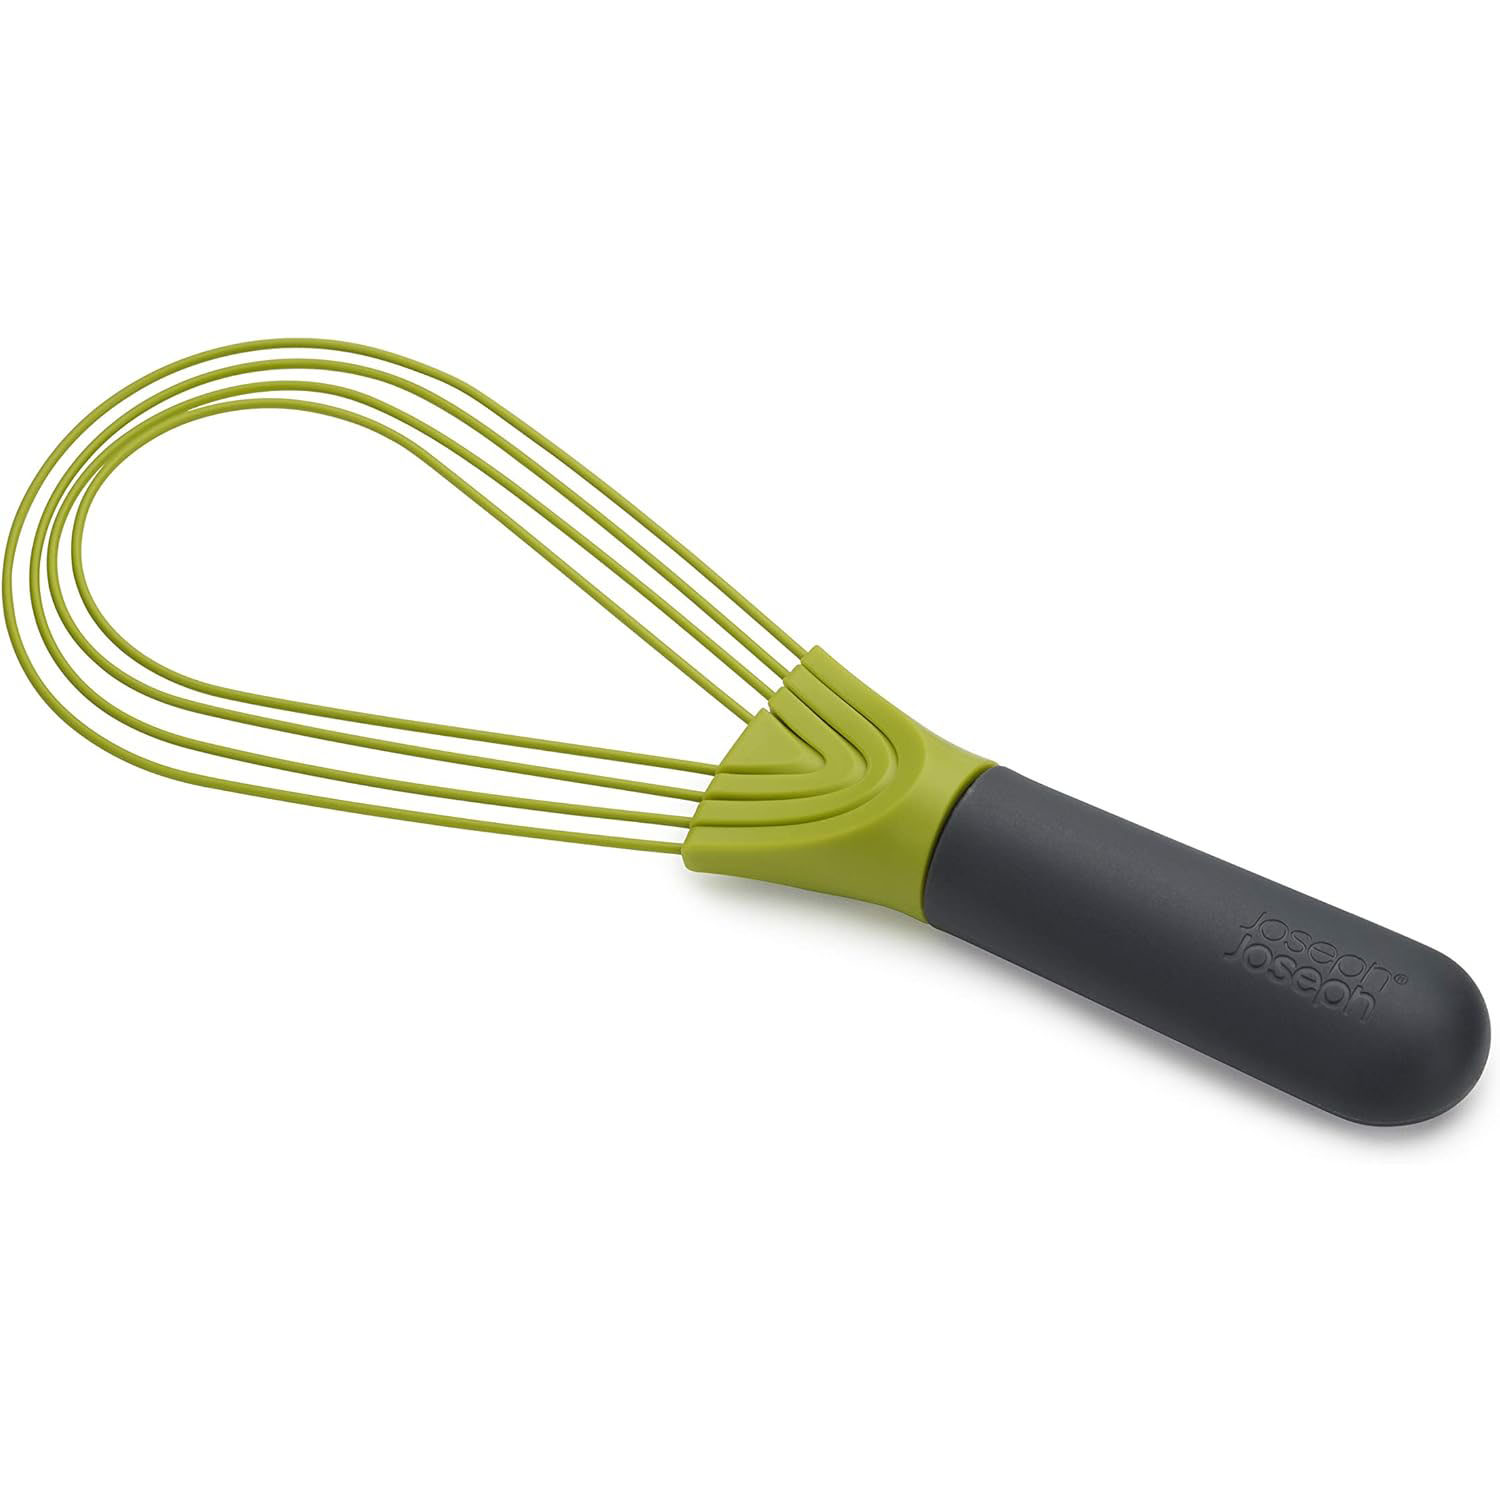 Joseph Joseph Twist Whisk 2-In-1 Collapsible Balloon and Flat Whisk Silicone Coated Steel Wire, Gray/Green